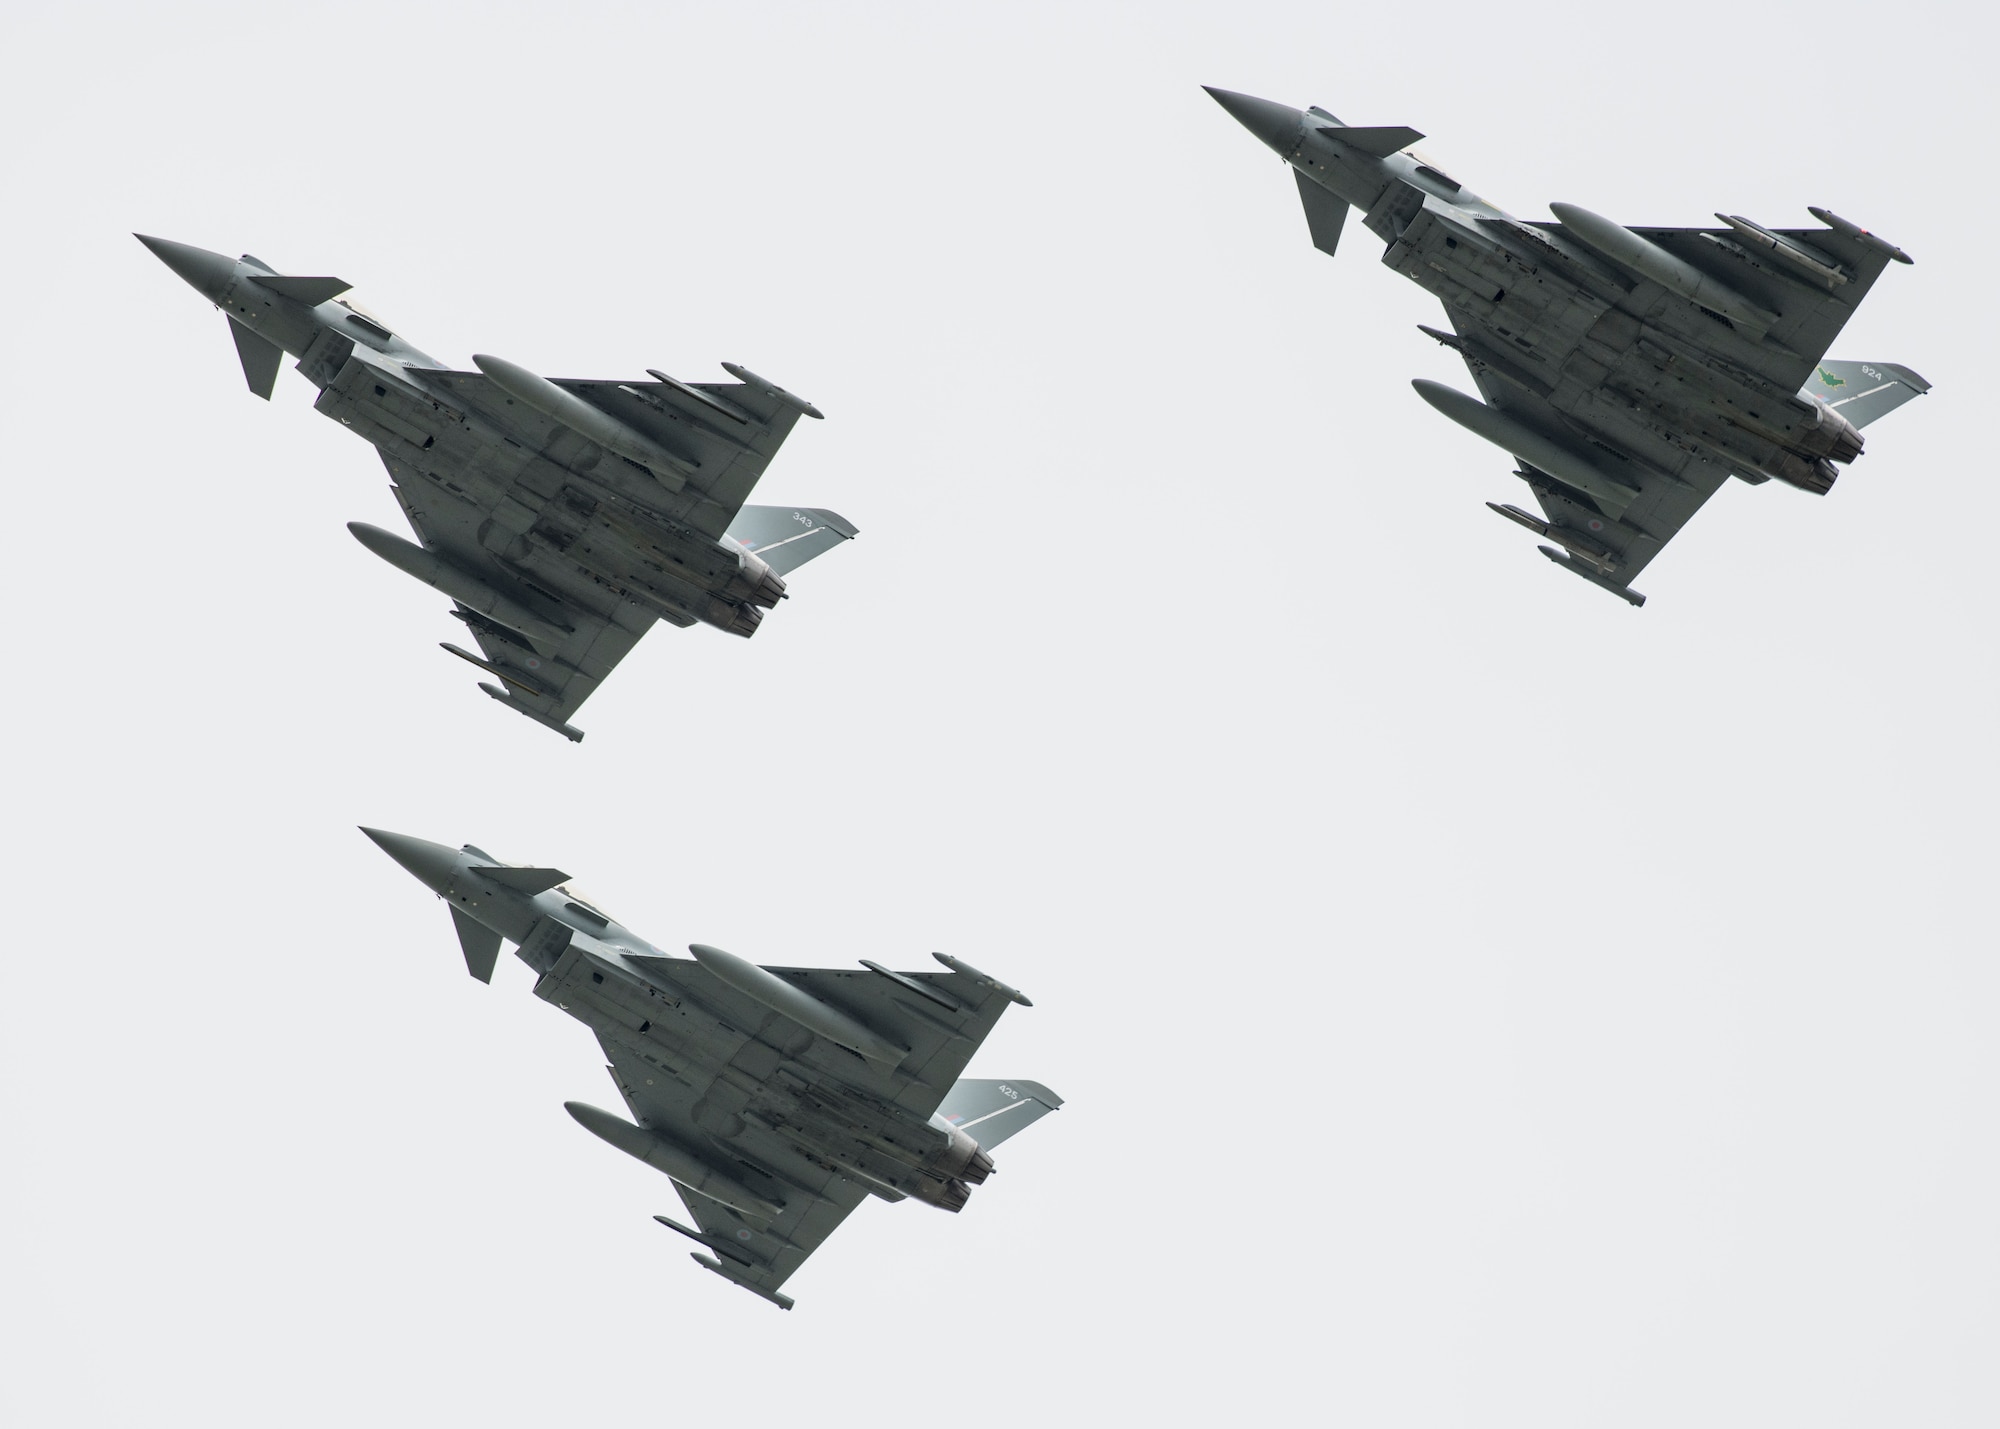 Royal Air Force Eurofighter Typhoons fly past the audience during the 2019 Royal International Air Tattoo at RAF Fairford, England, July 20, 2019. This year, RIAT commemorated the 70th anniversary of NATO and highlighted the United States' enduring commitment to its European allies. (U.S. Air Force photo by Airman 1st Class Jennifer Zima)